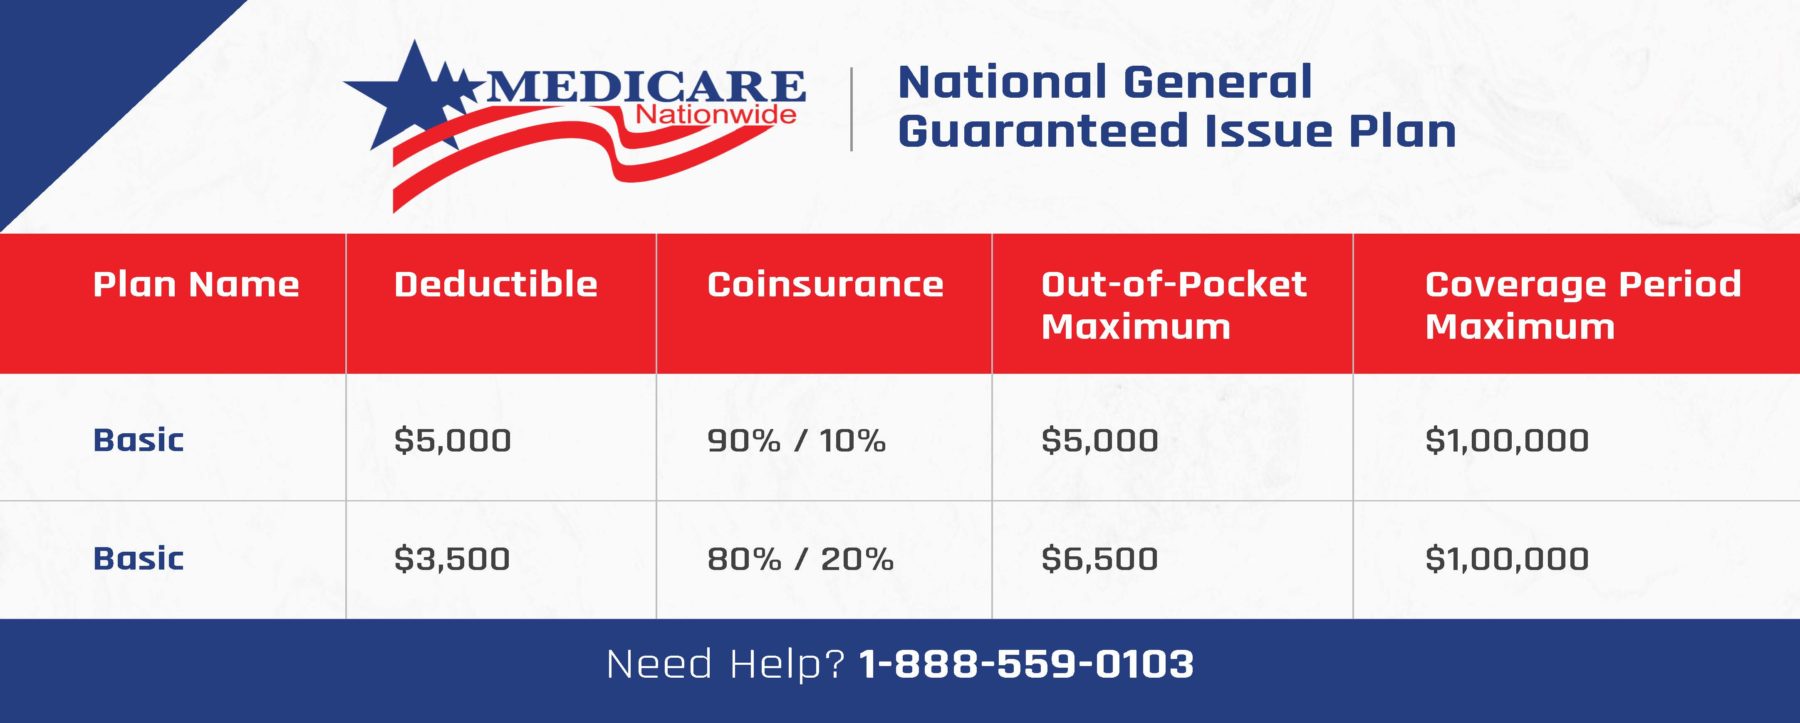 National General Guaranteed Issue Plan